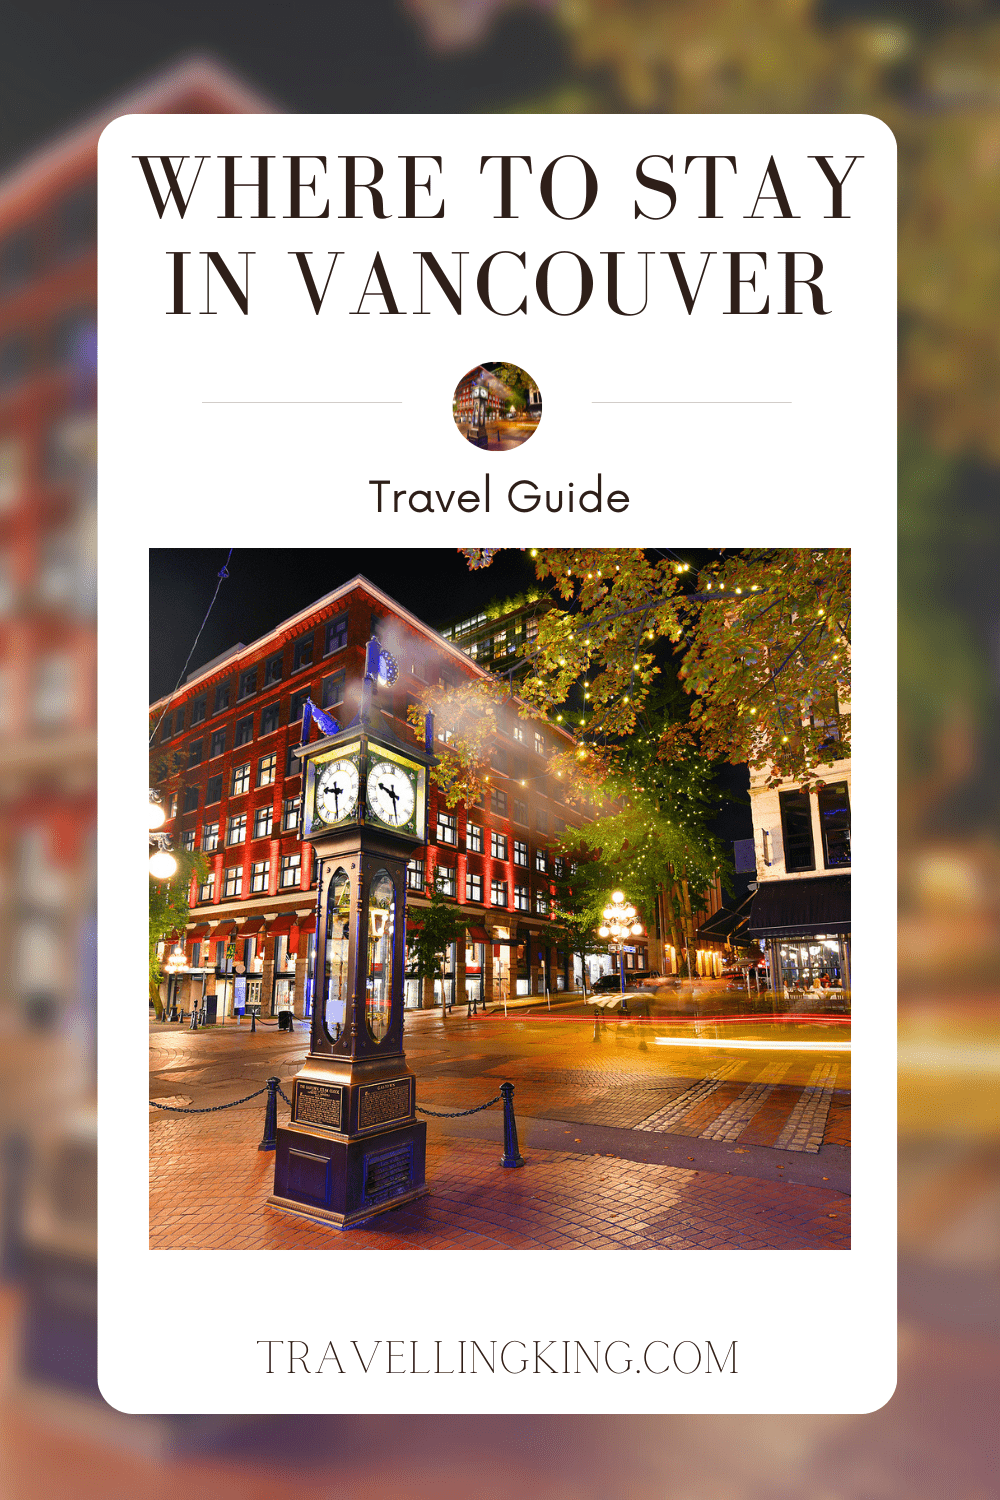 Where to Stay in Vancouver